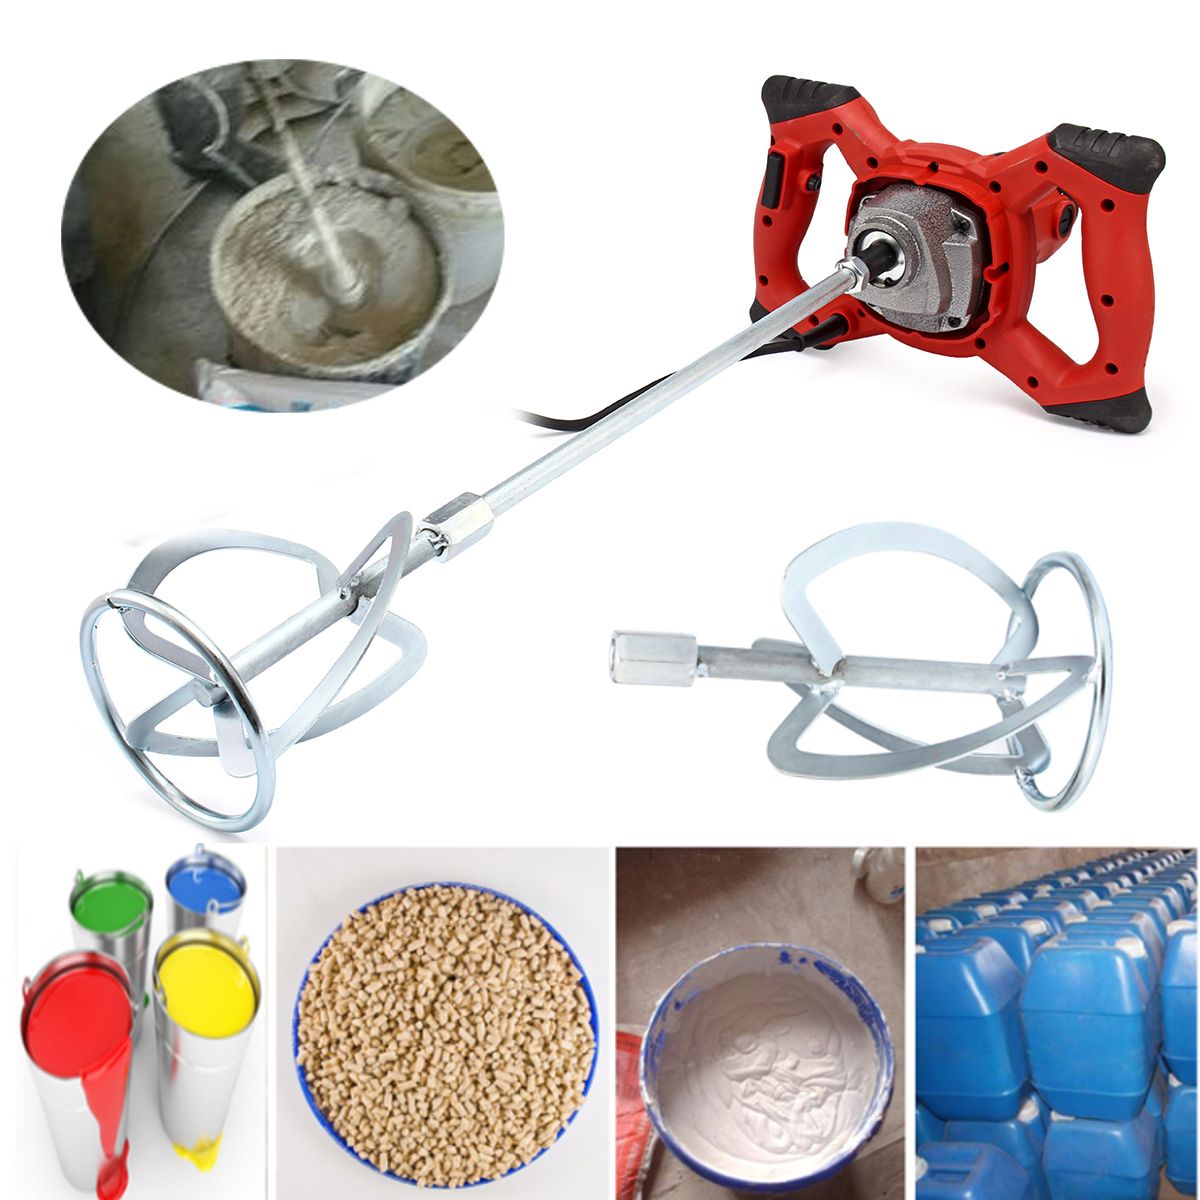 6-Variable-Speed-Electric-Mortar-Mixer-Paint-Concrete-Glue-Plaster-Rotary-Mixing-Machine-1360523